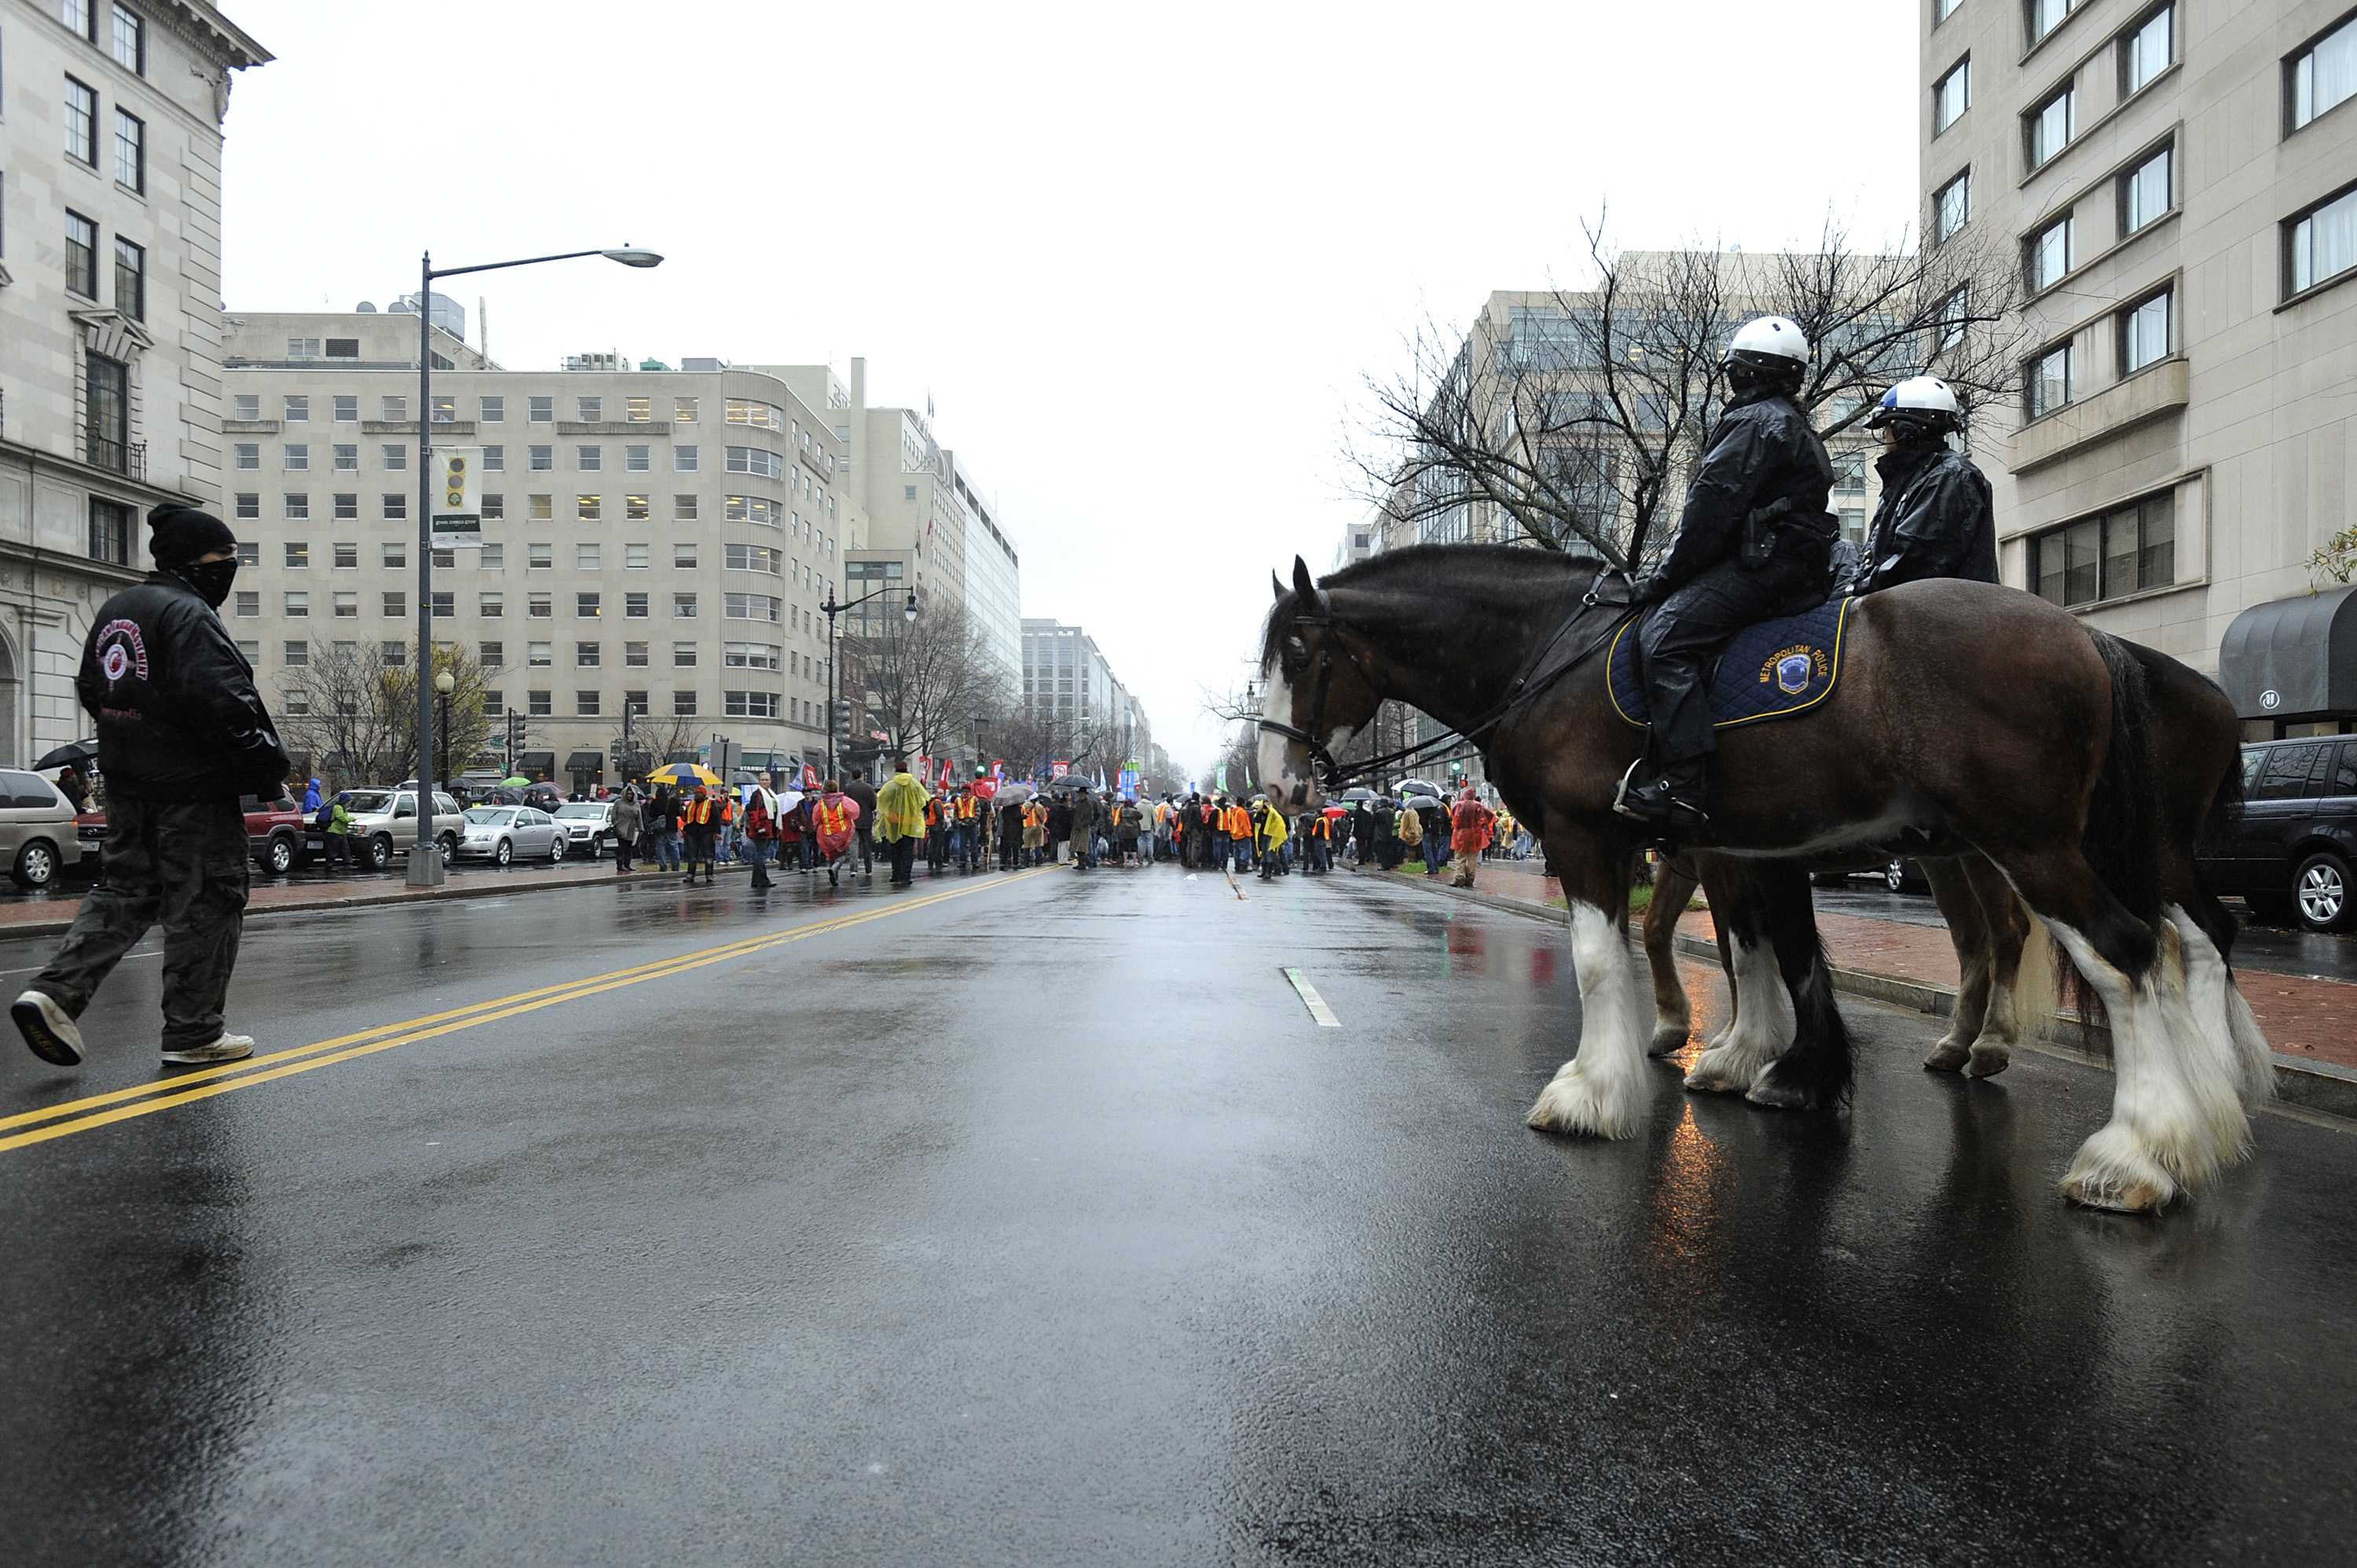 Mounted police officers stand by as protesters from the Occupy movement march through the streets of the national's capital, tying up the famed K Street lobbyist corridor in Washington